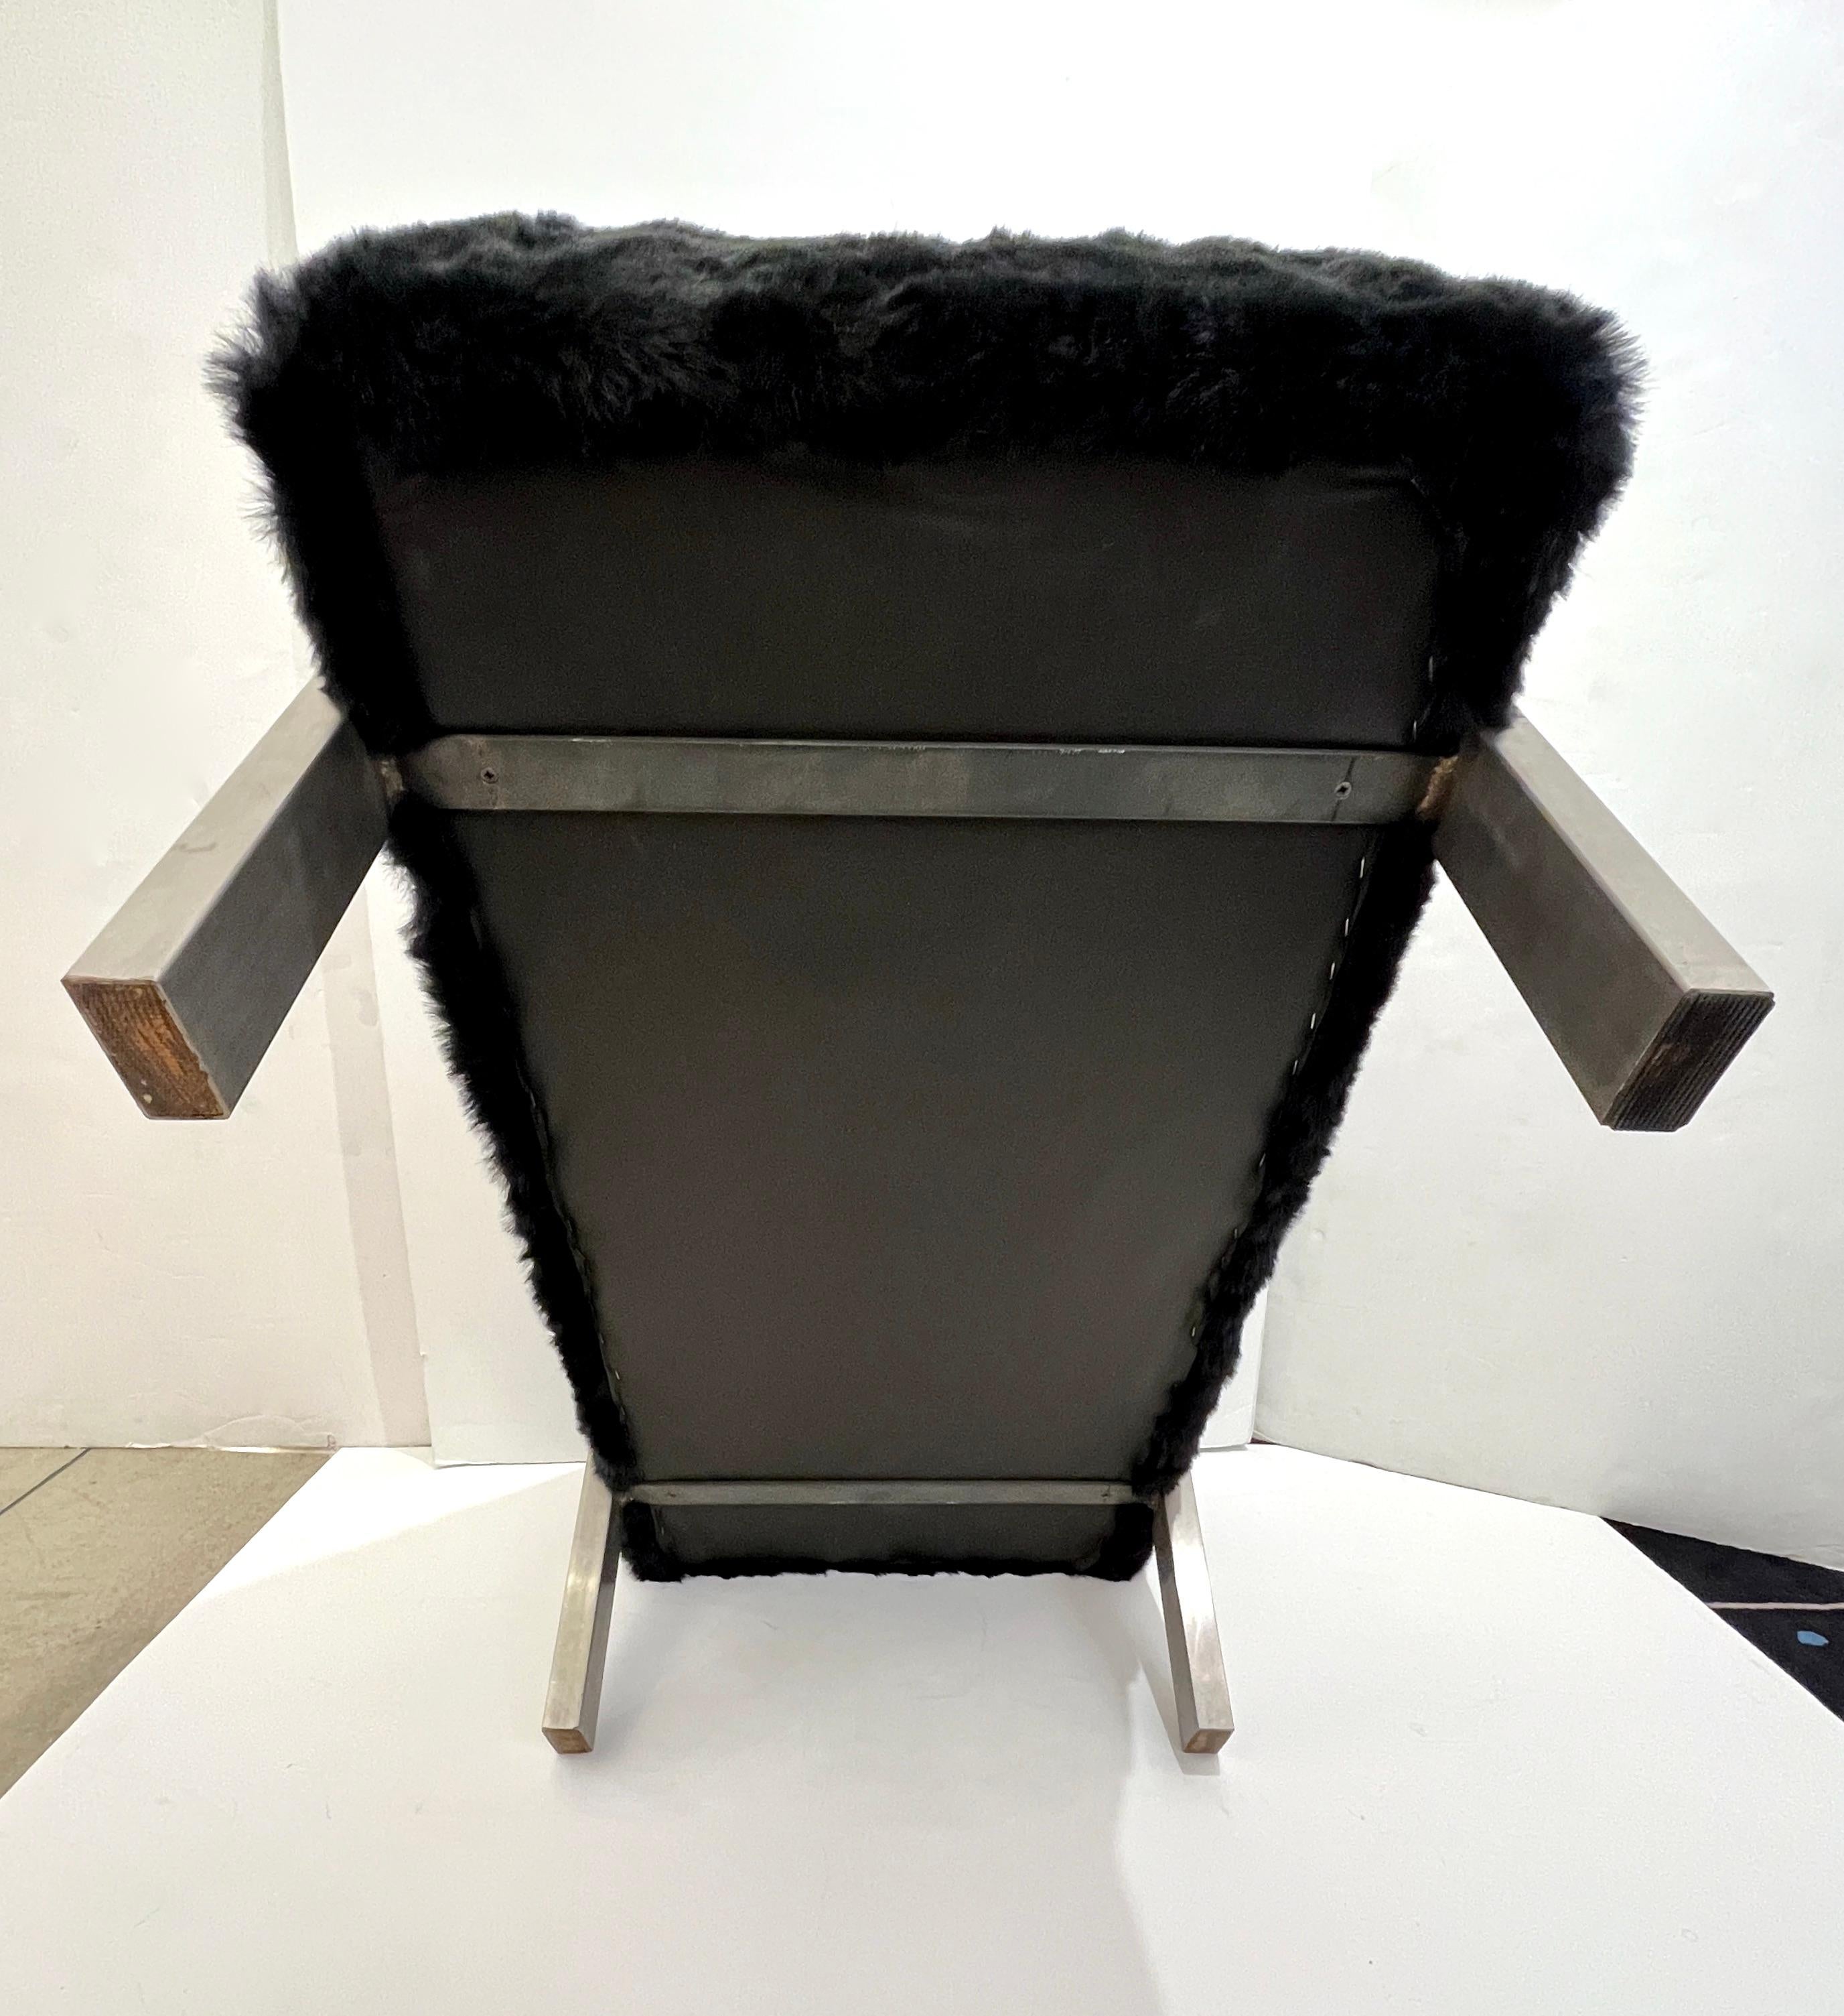 1970s Italian Vintage Black Faux Fur Steel Bed Stool Bench - 1 Pair available For Sale 2